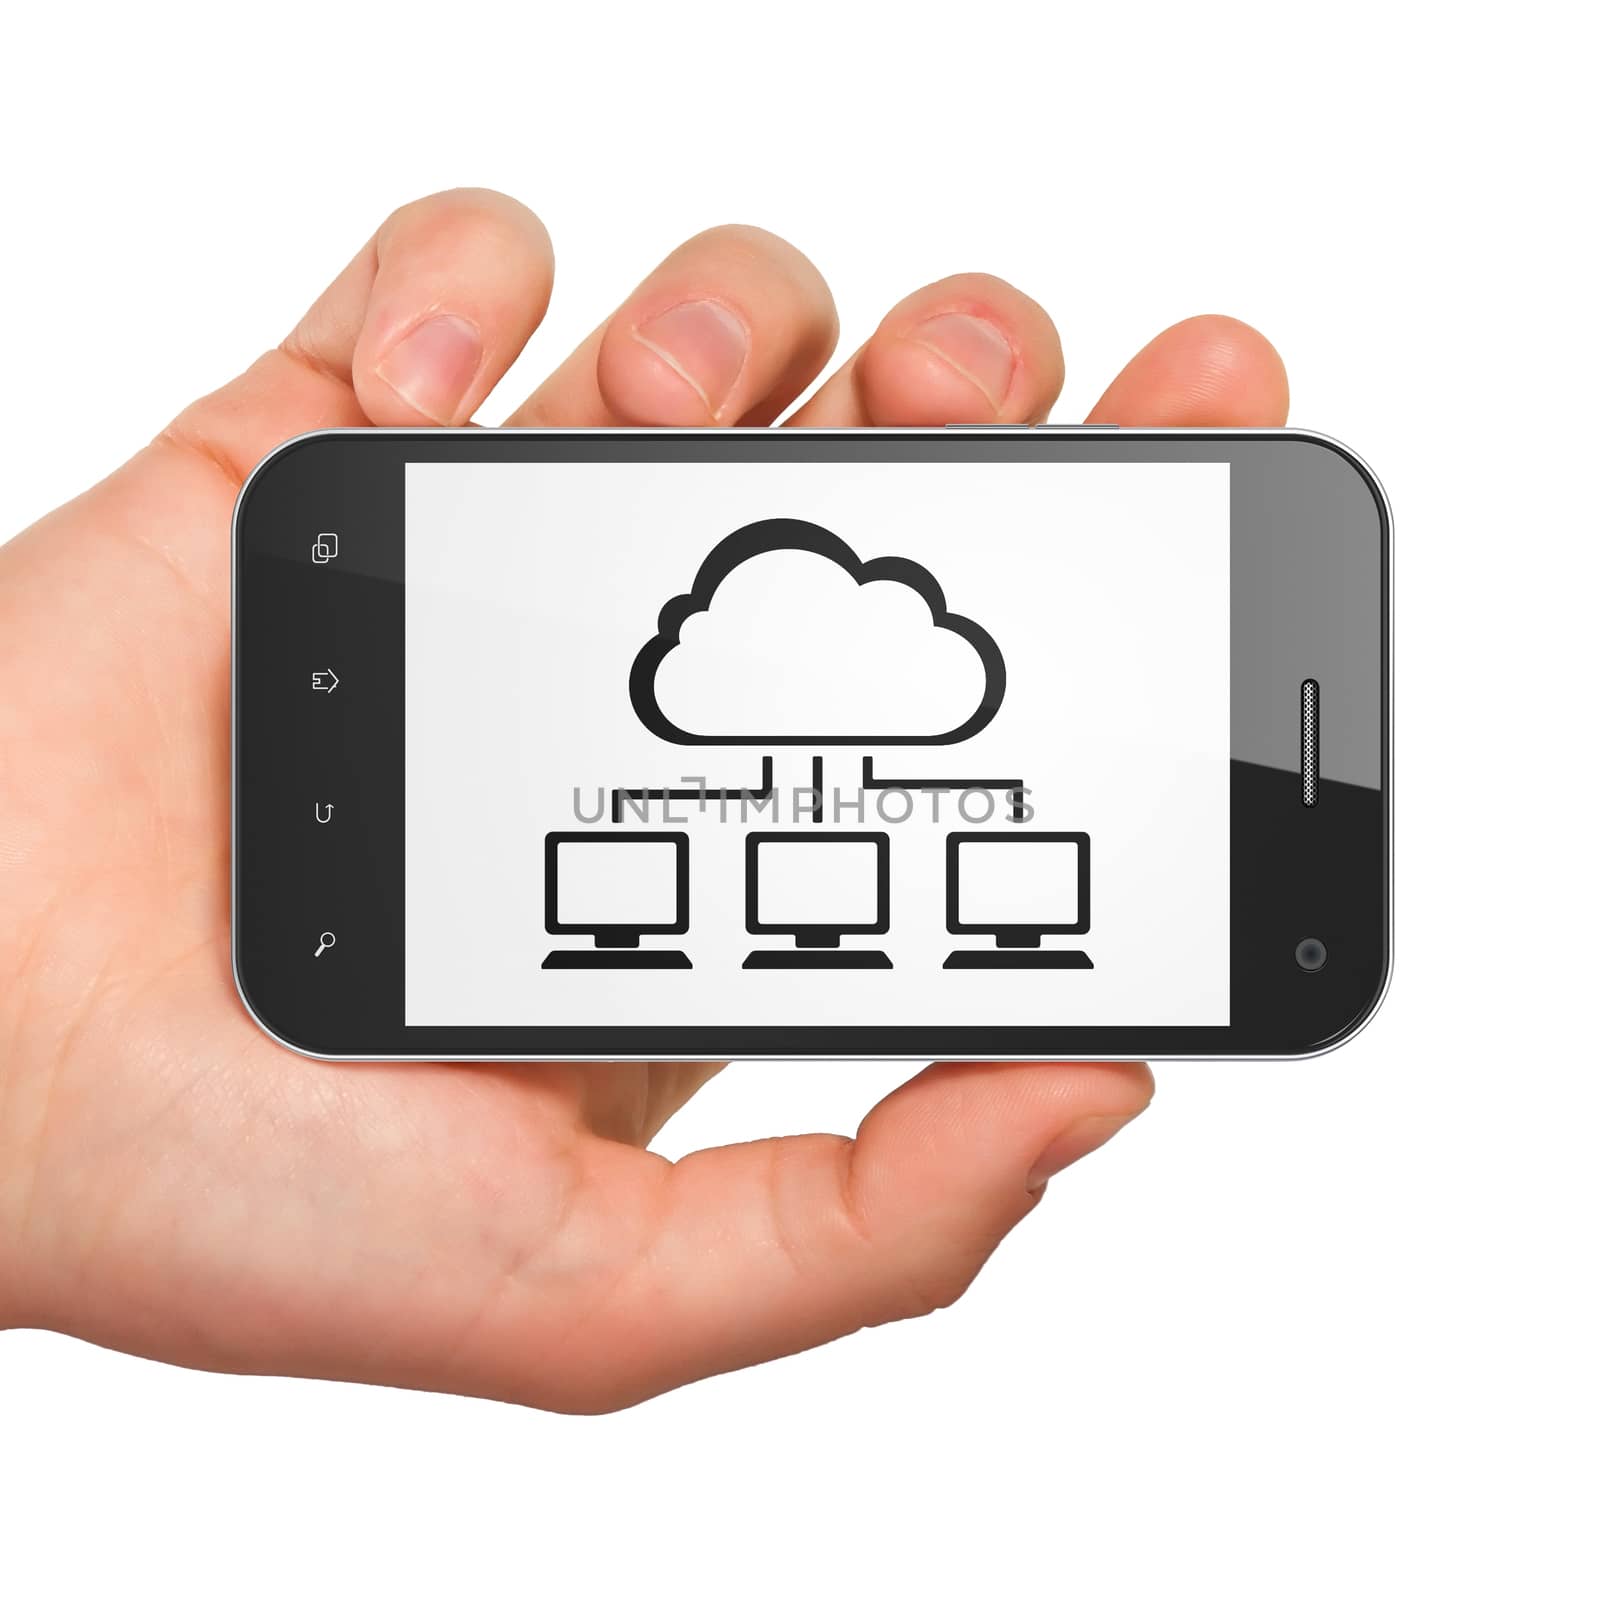 Cloud networking concept: hand holding smartphone with Cloud Network on display. Mobile smart phone in hand on White background, 3d render